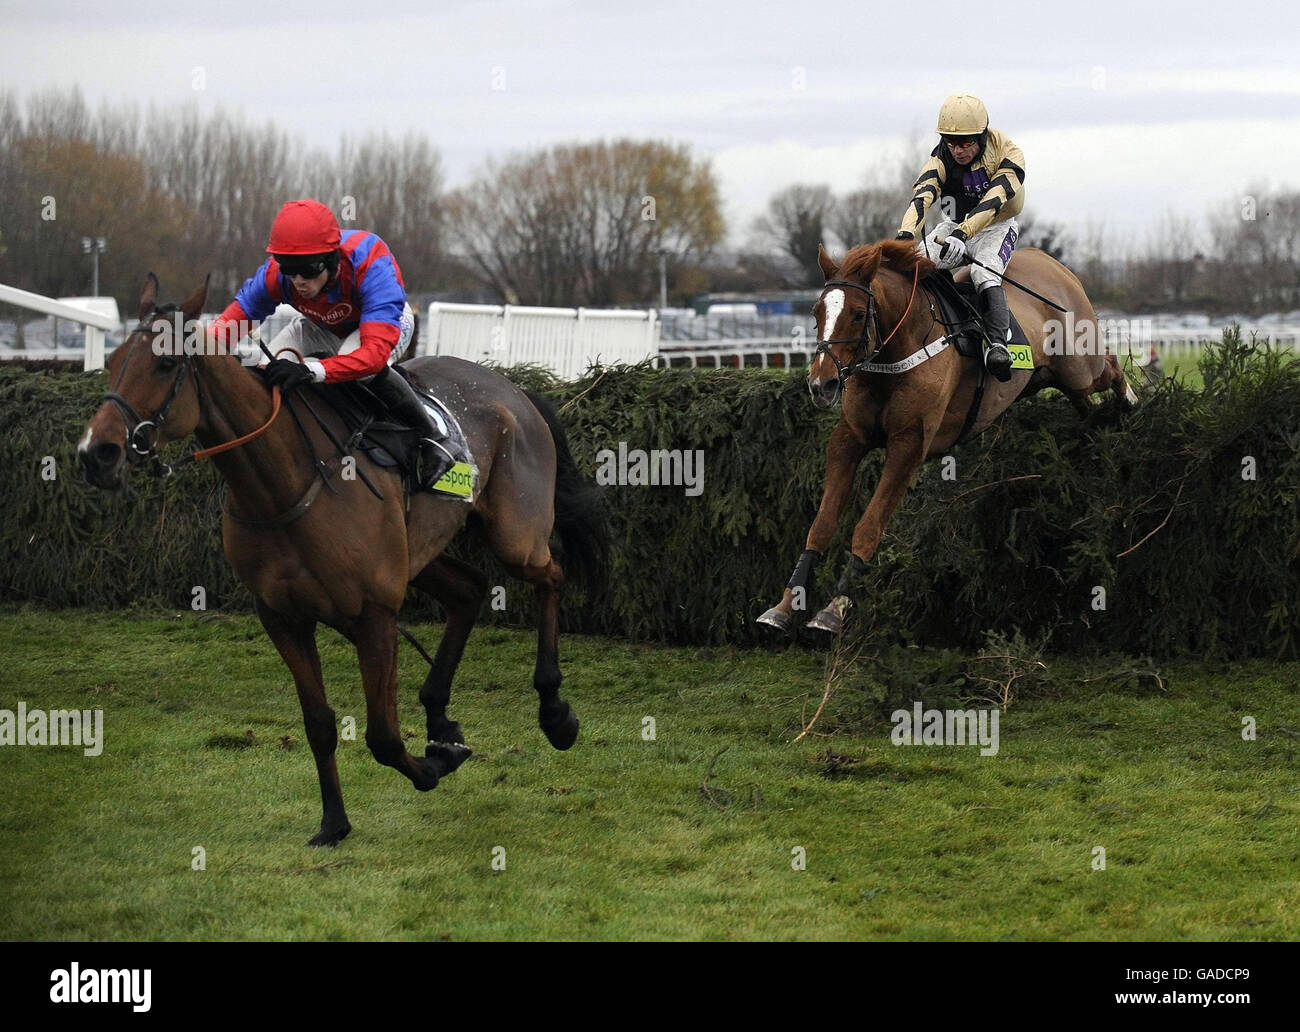 Jockey Sam Thomas and Mr Pointment (left) jump the last fence to win the totesport.com Becher Chase Handicap at Aintree Racecourse. Stock Photo